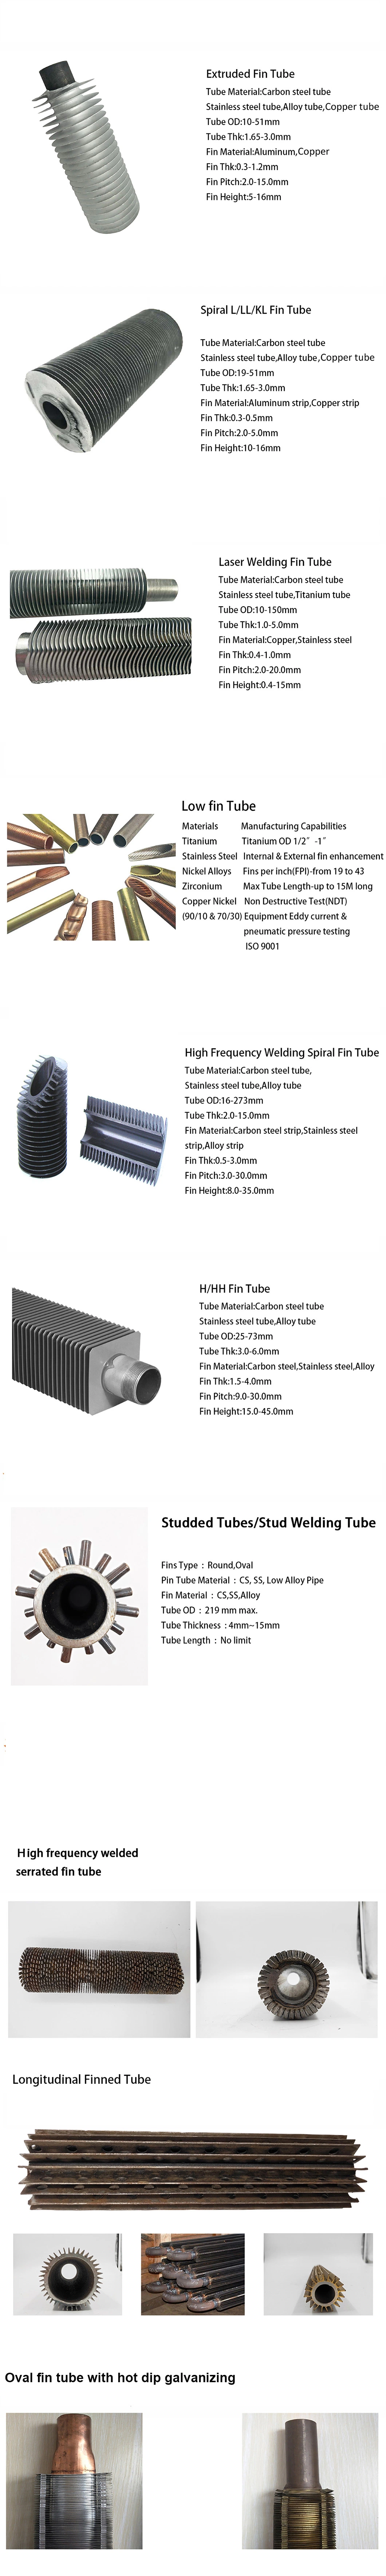 China Manufacturers Spiral L G H Type Welded Aluminum Copper Alloy Steel Fin Rolled Exchanger Heat Finned Tube for Heat Exchanger /Air Heater